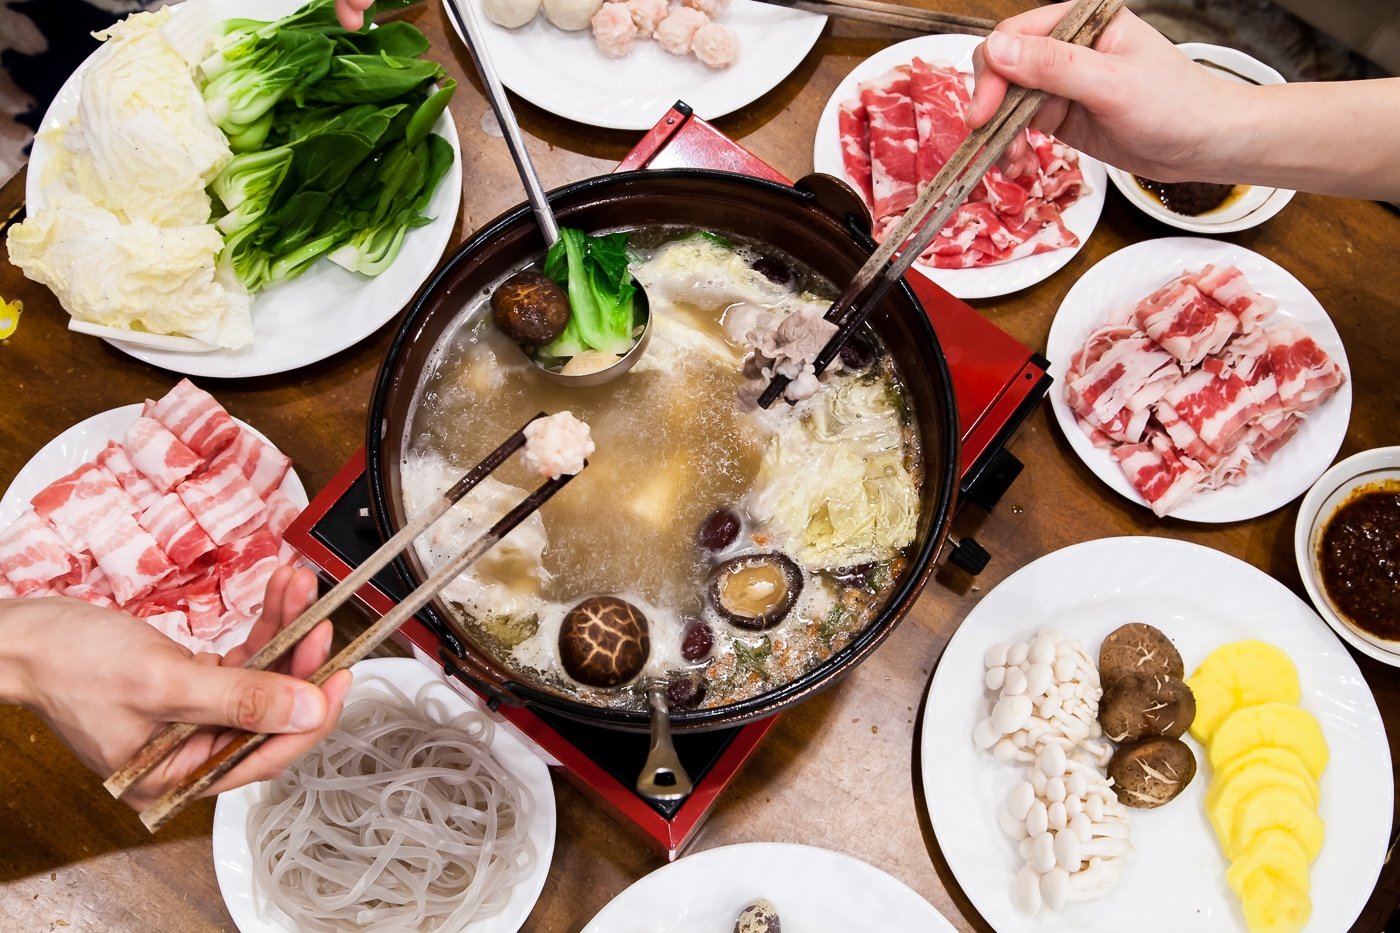 Been wanting to try this instant hot pot for years thanks to